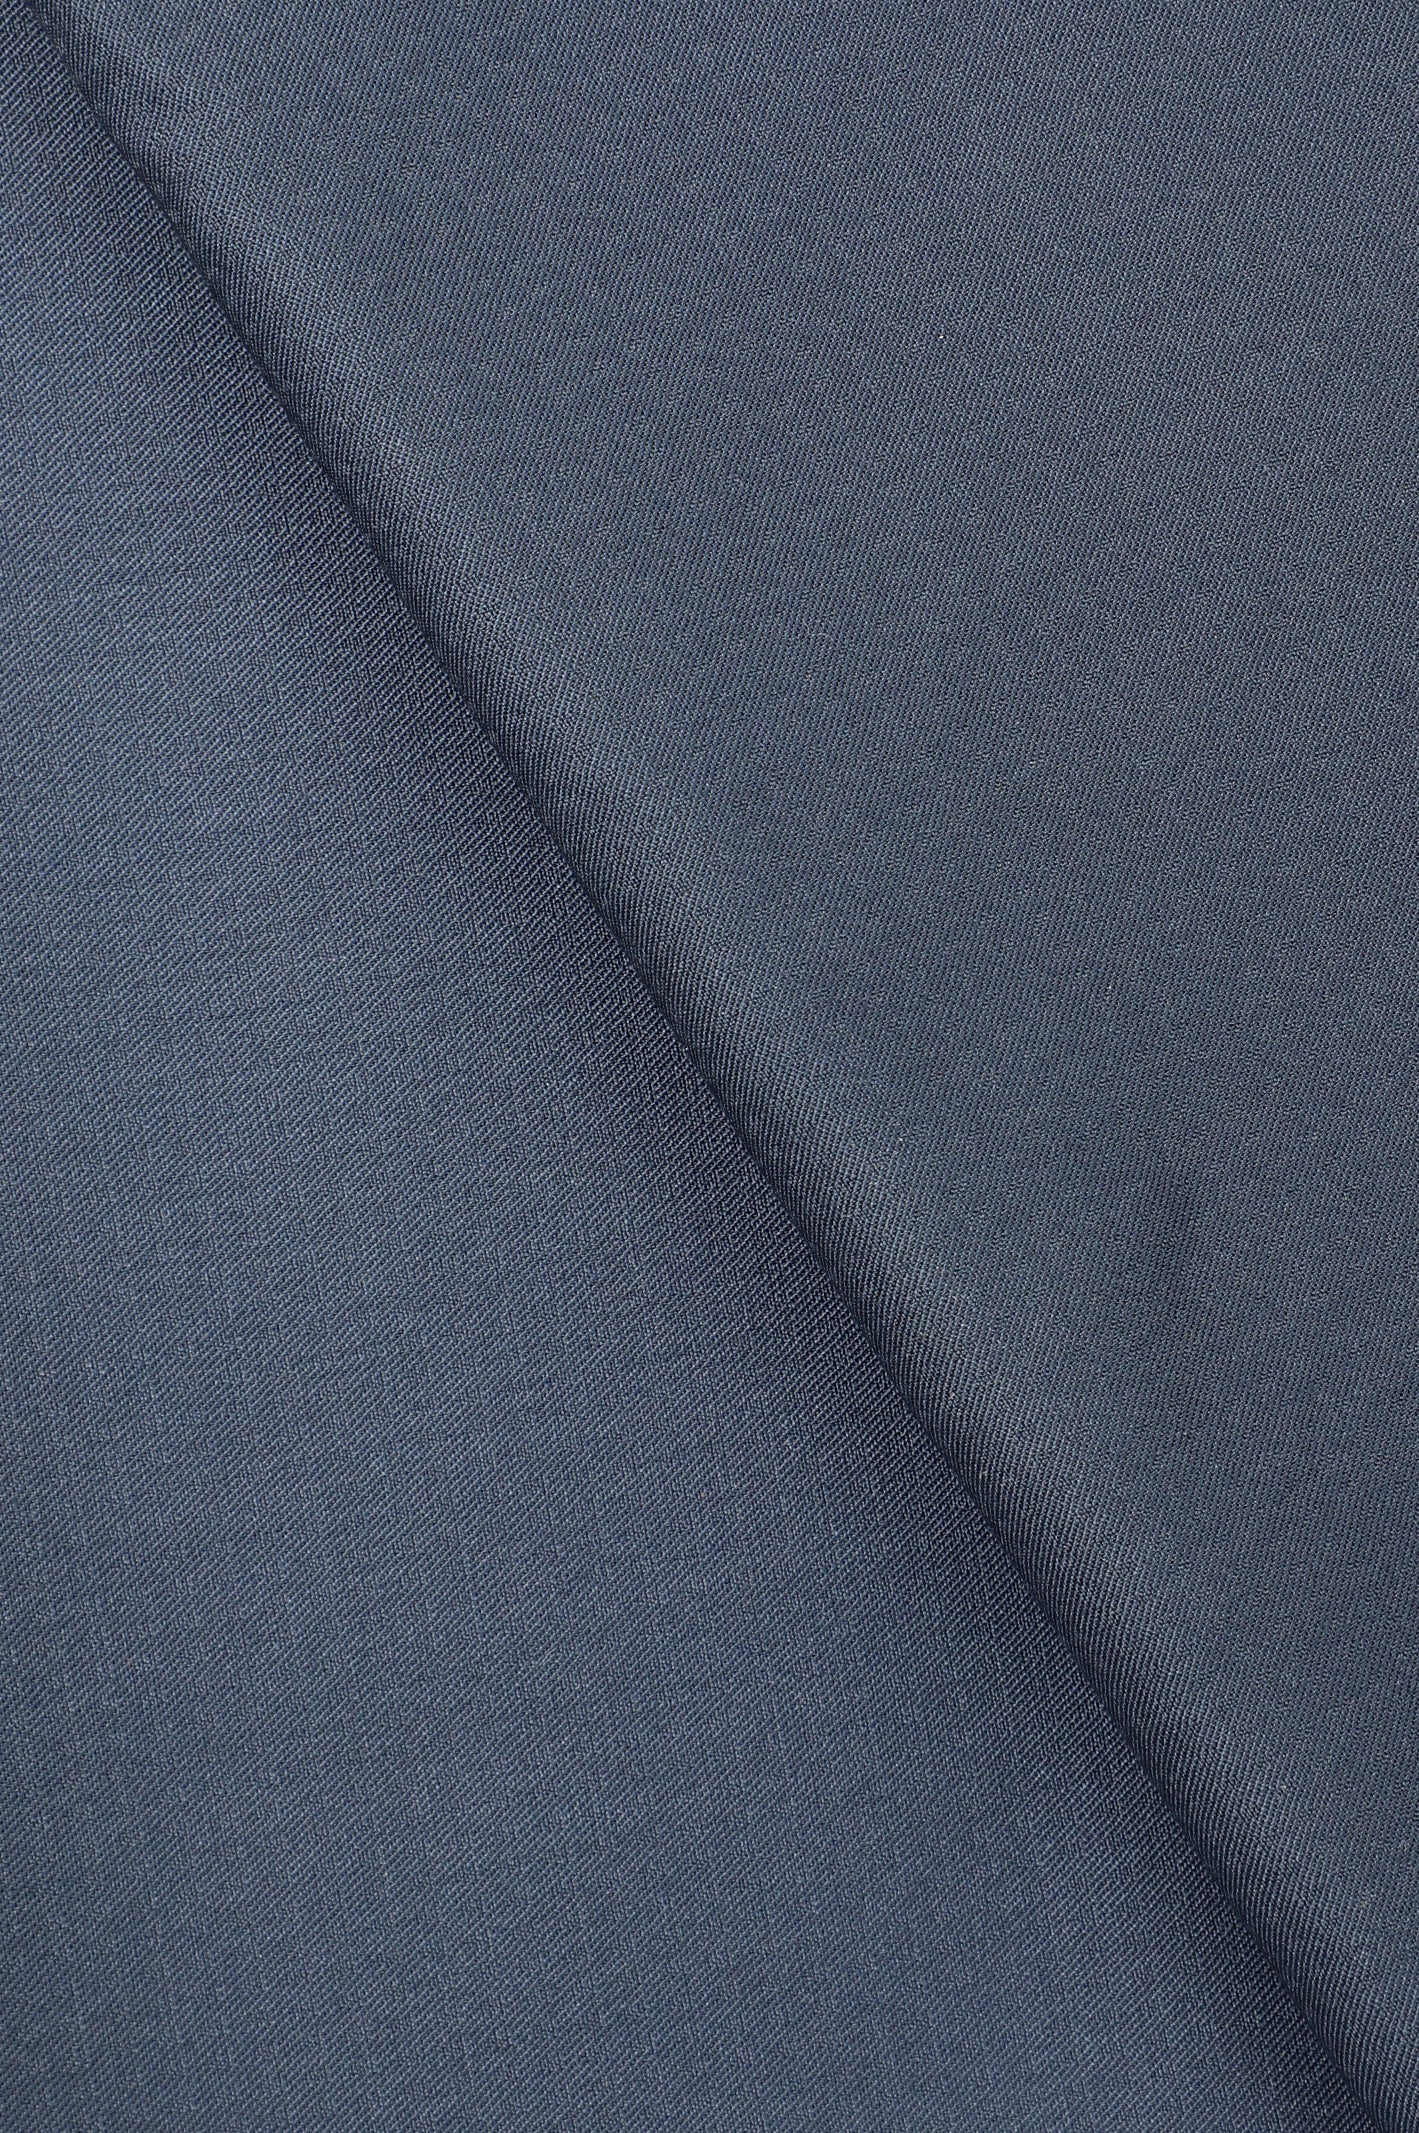 Unstitched Fabric for Men SKU: US0184-C-GREY - Diners